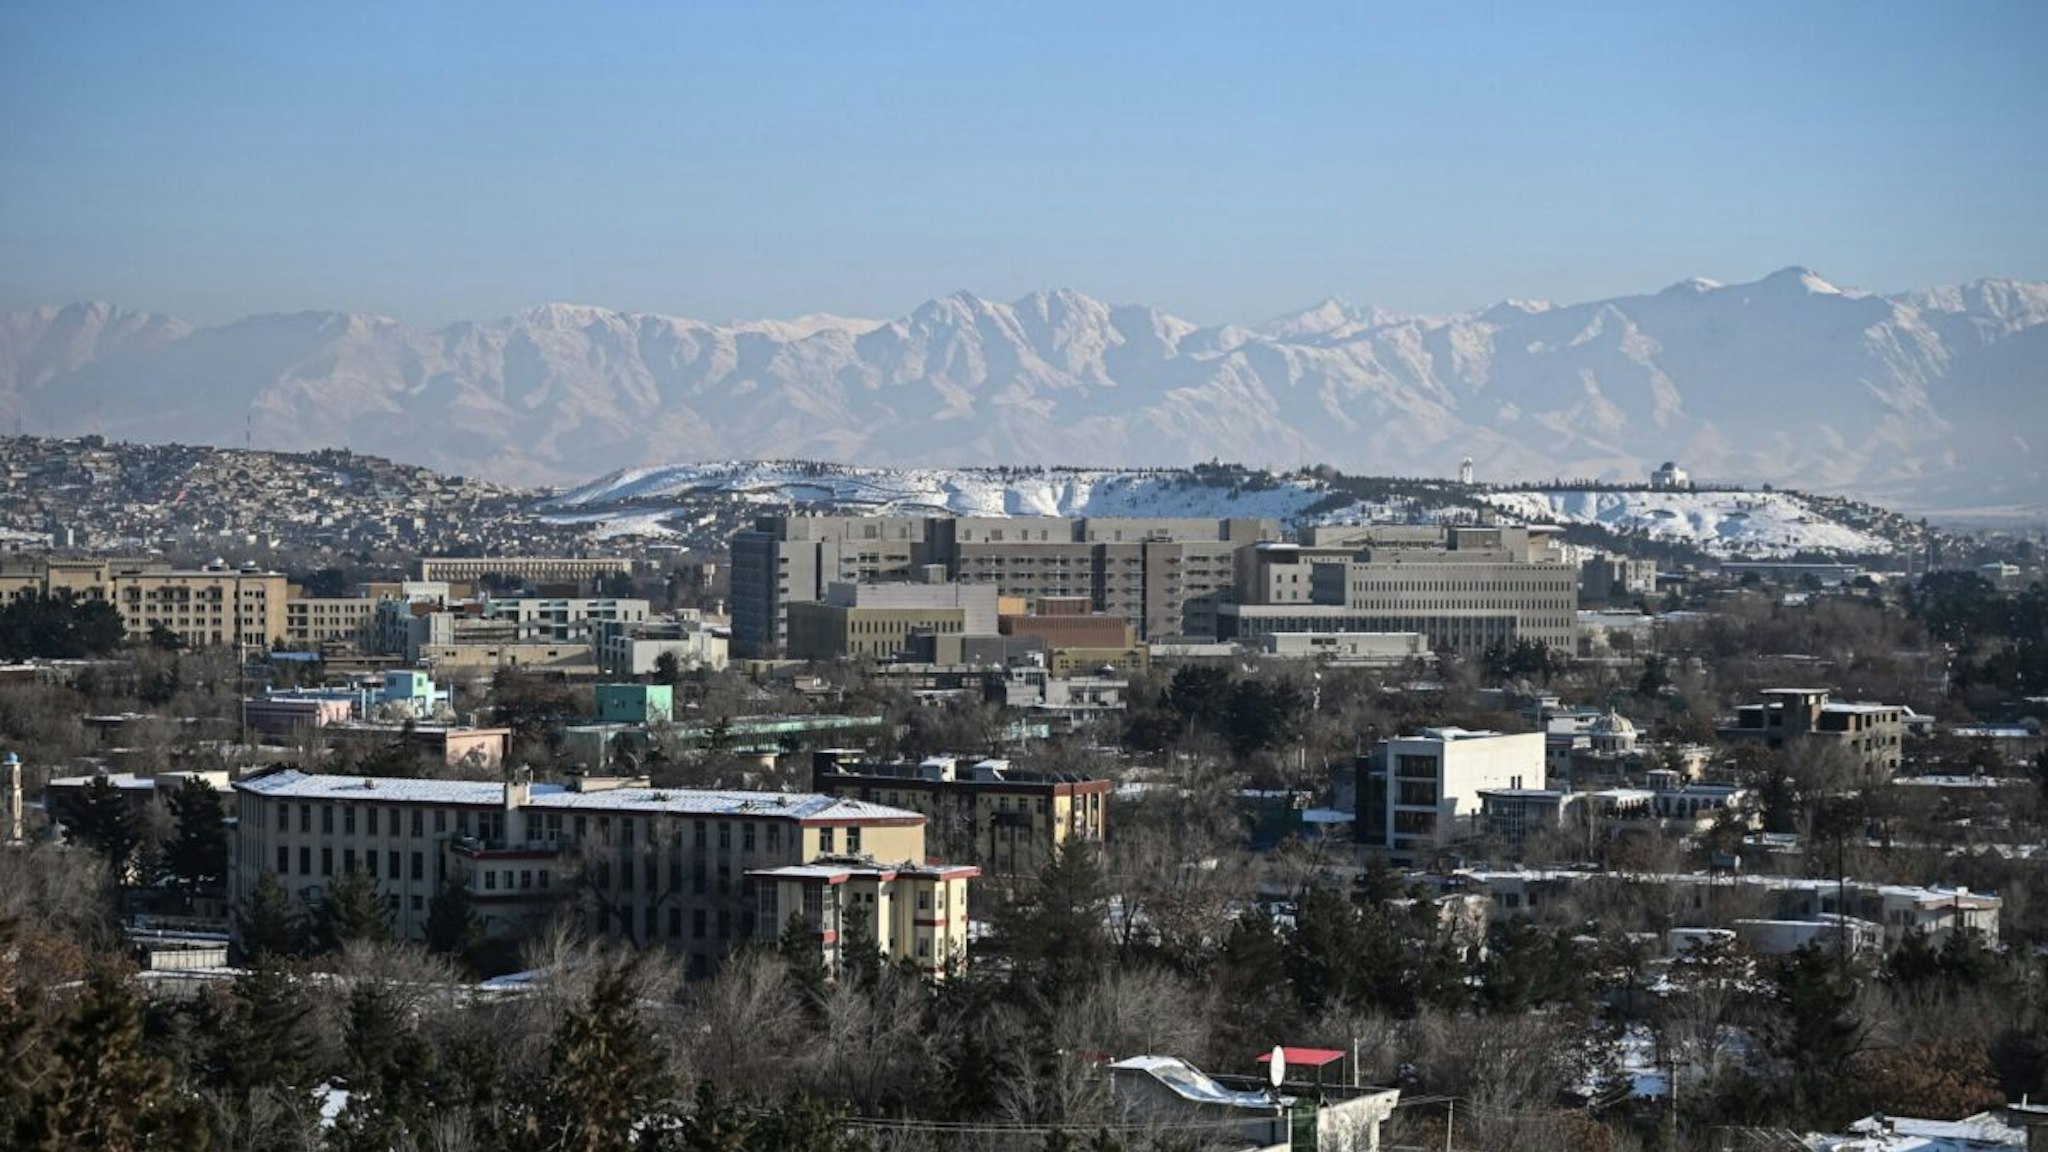 A general view of the Kabul city is seen from atop a hill at Wazir Akbar Khan hill in Kabul on January 10, 2022.